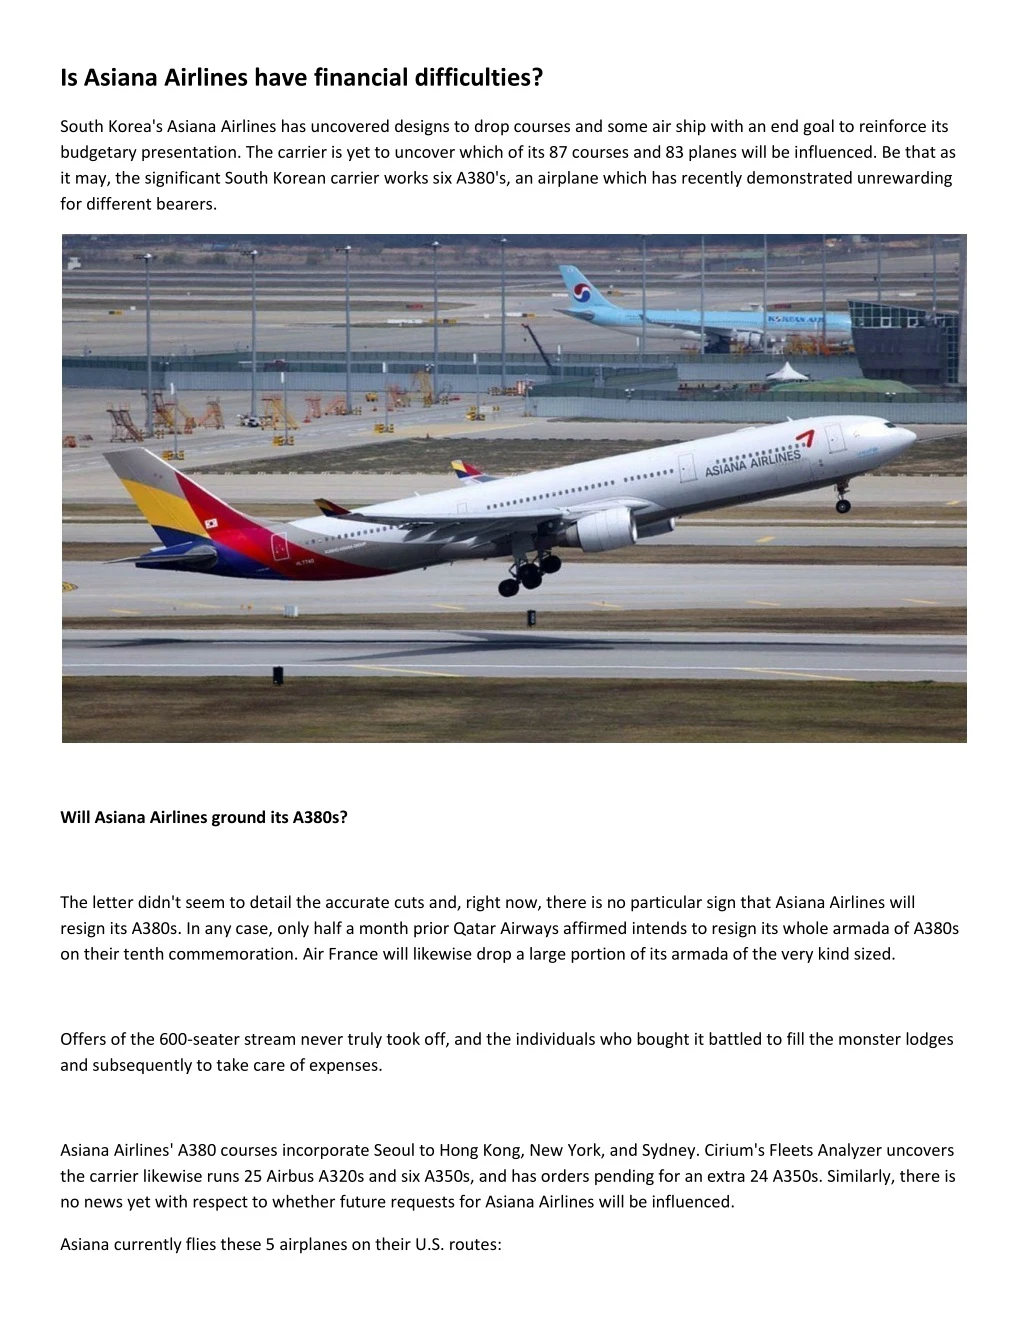 is asiana airlines have financial difficulties